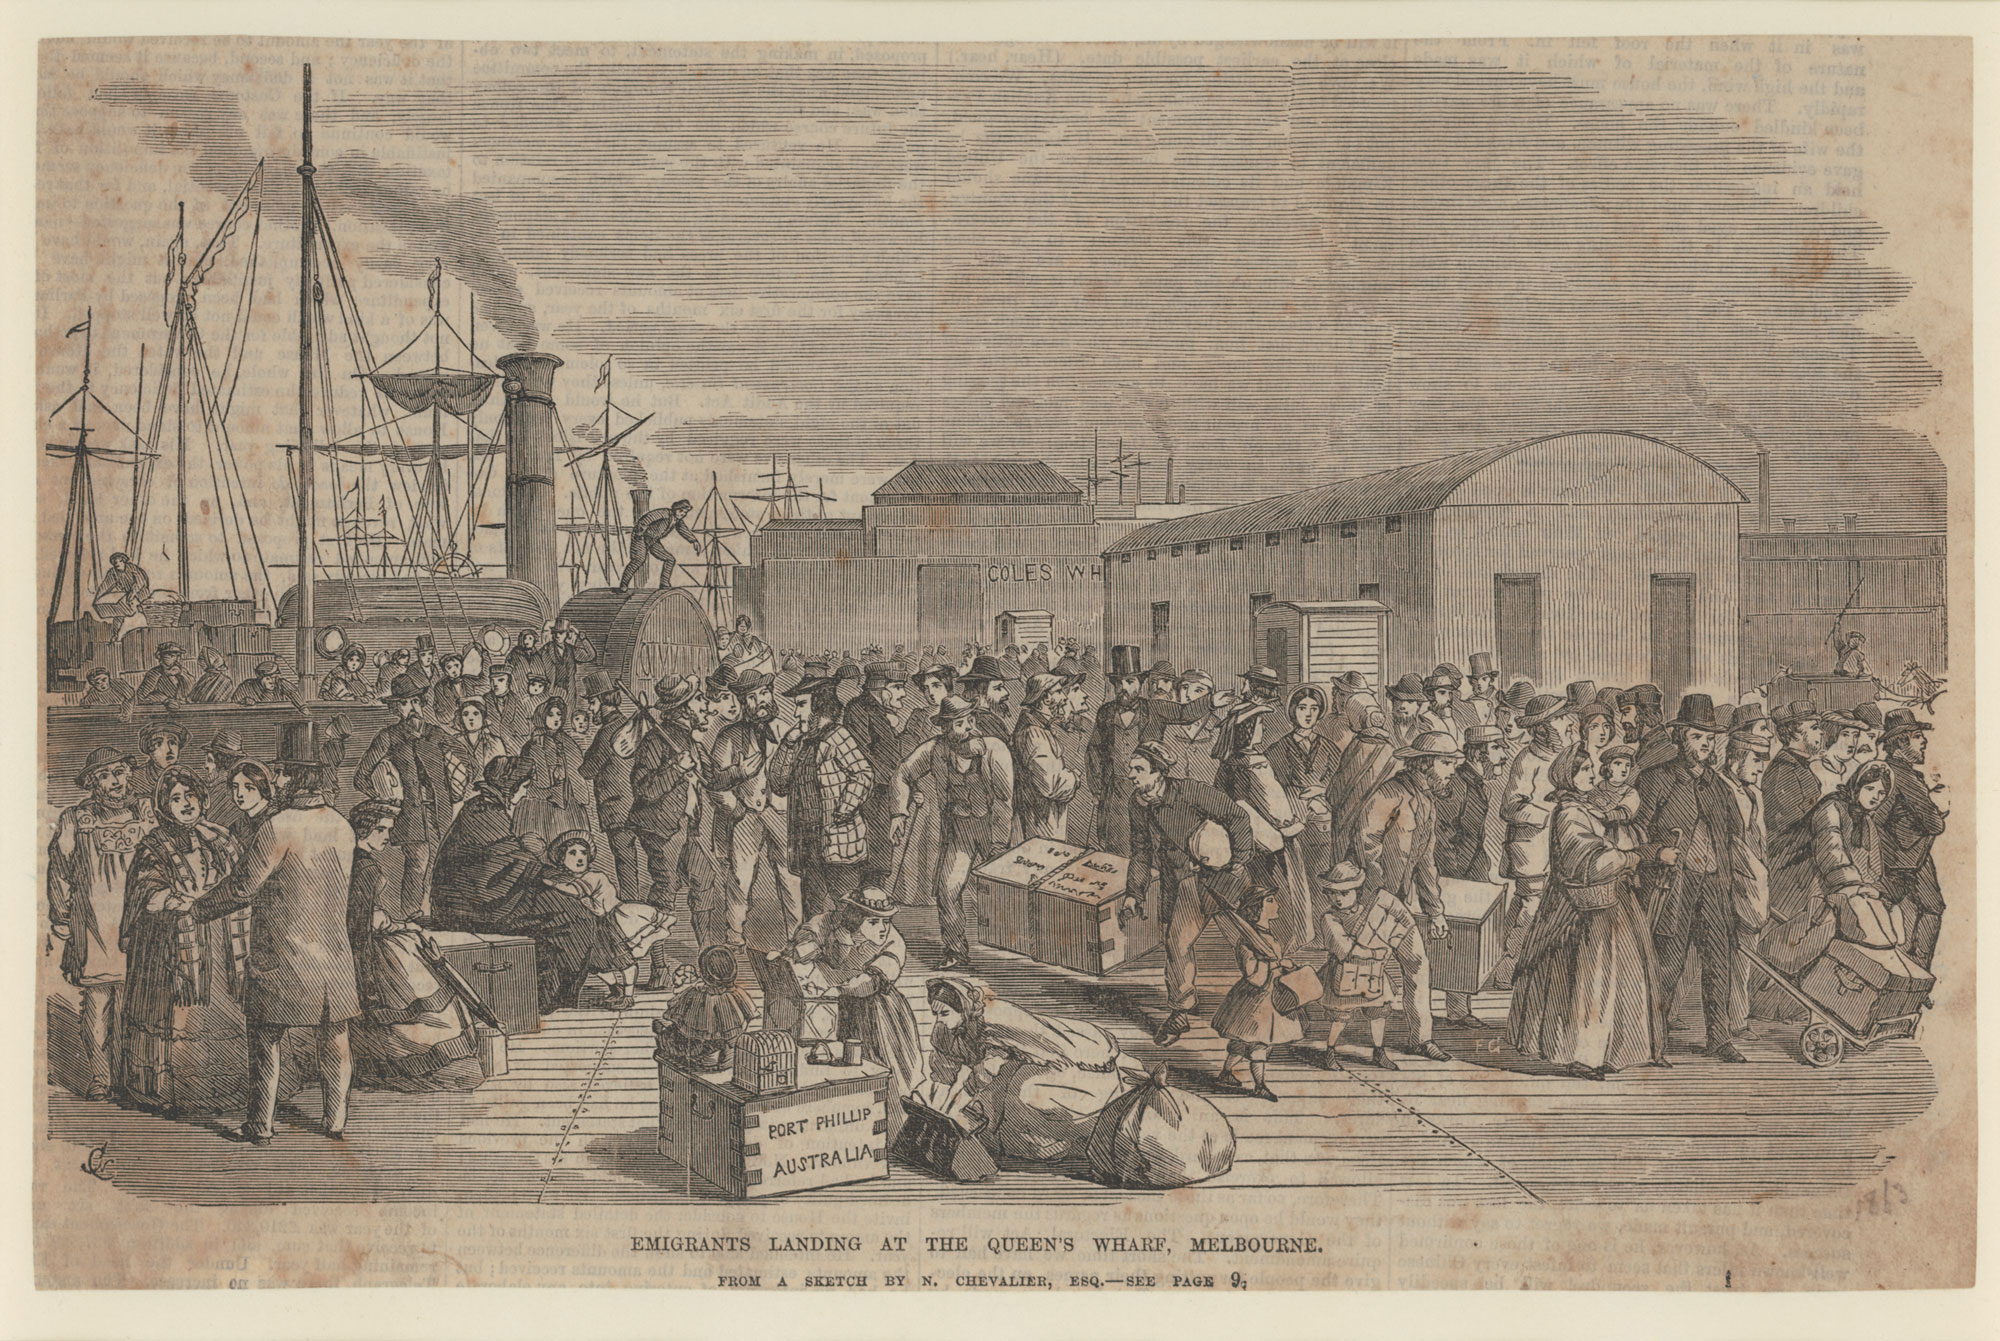 <p><em>Emigrants Landing at the Queen’s Wharf, Melbourne</em>, by Frederick Grosse</p>
